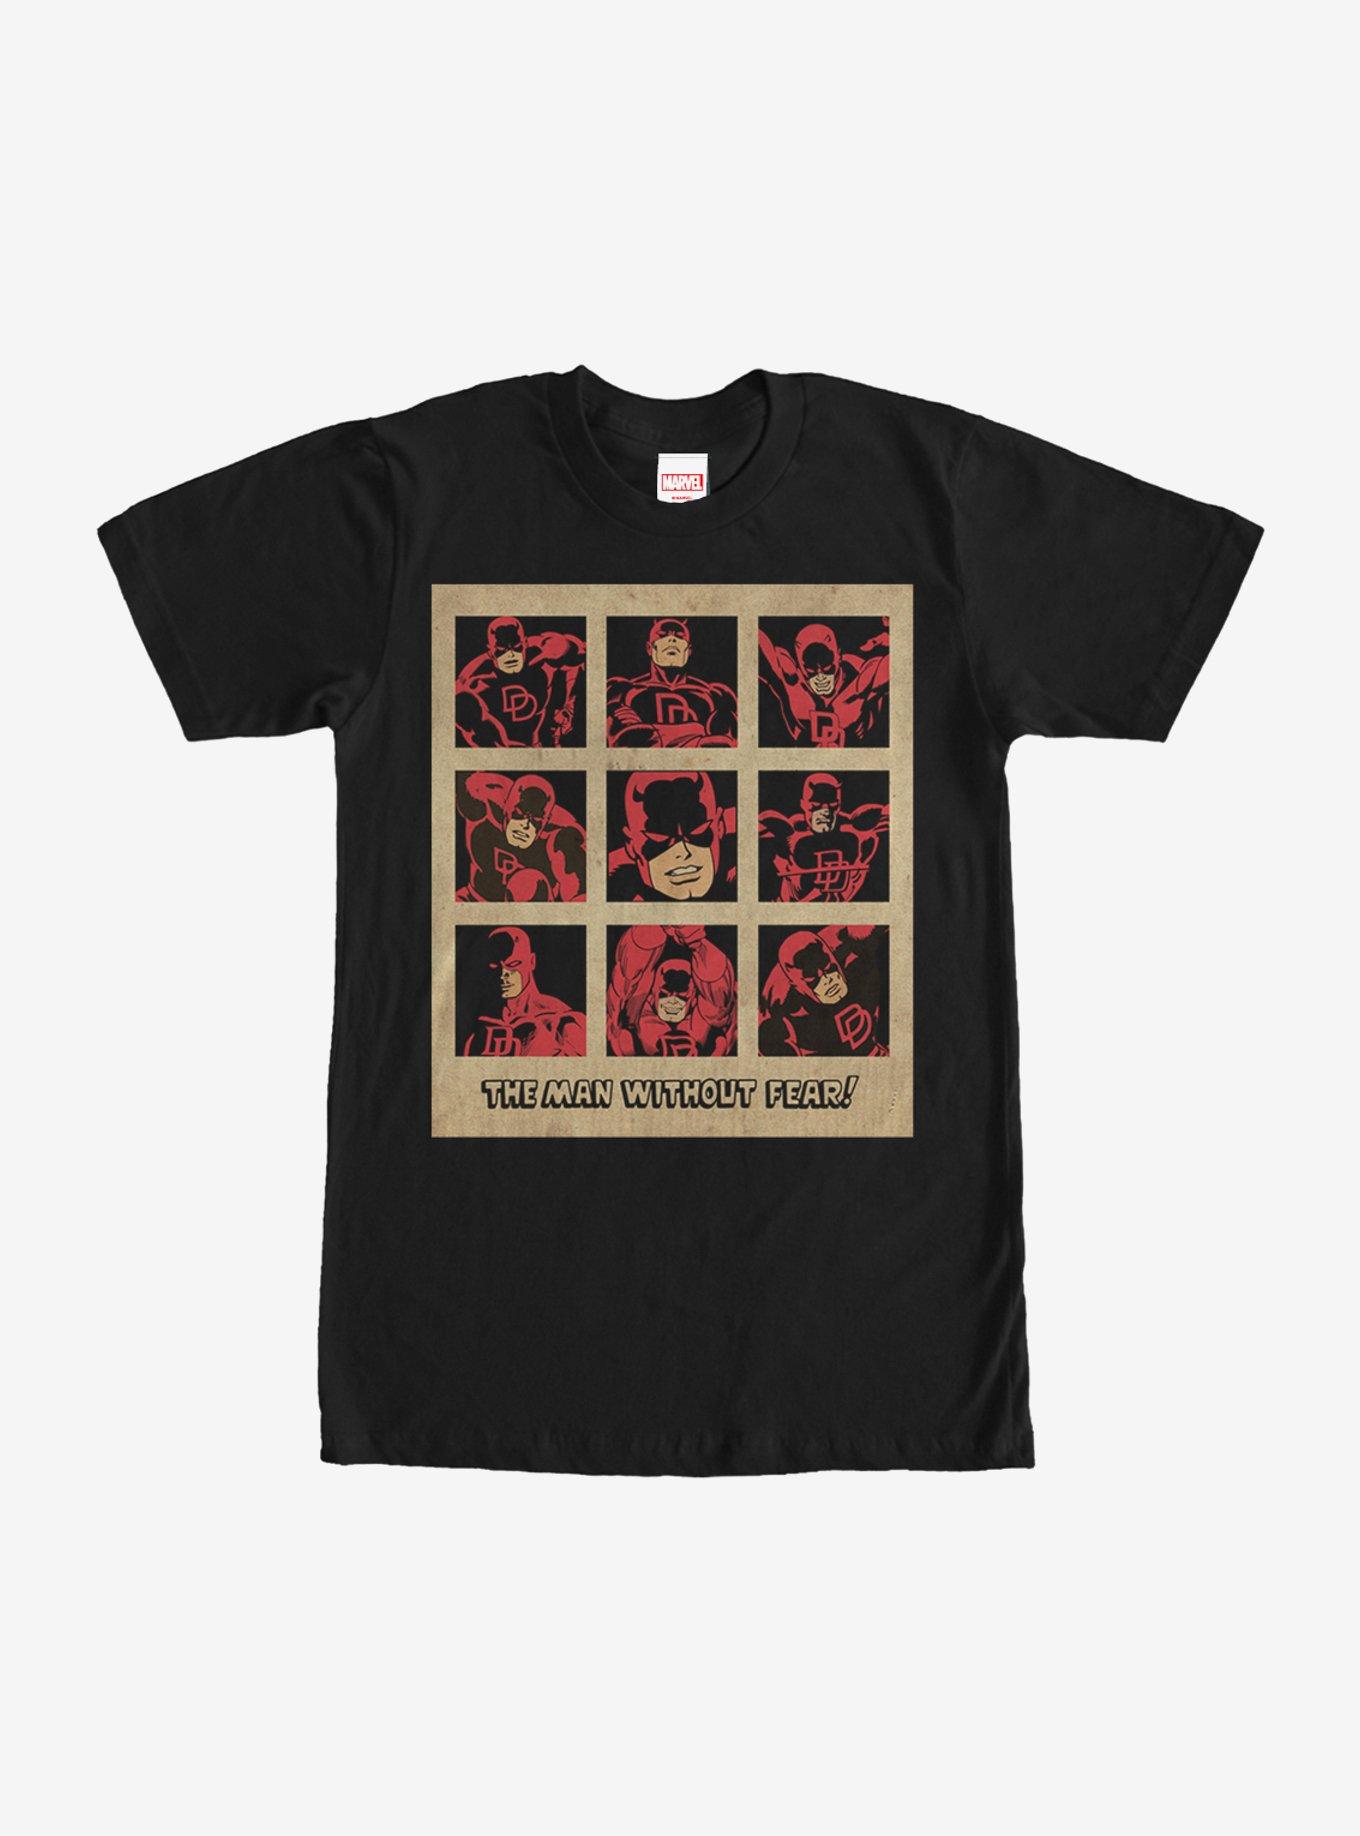 Marvel Daredevil Classic Man Without Fear T-Shirt, BLACK, hi-res